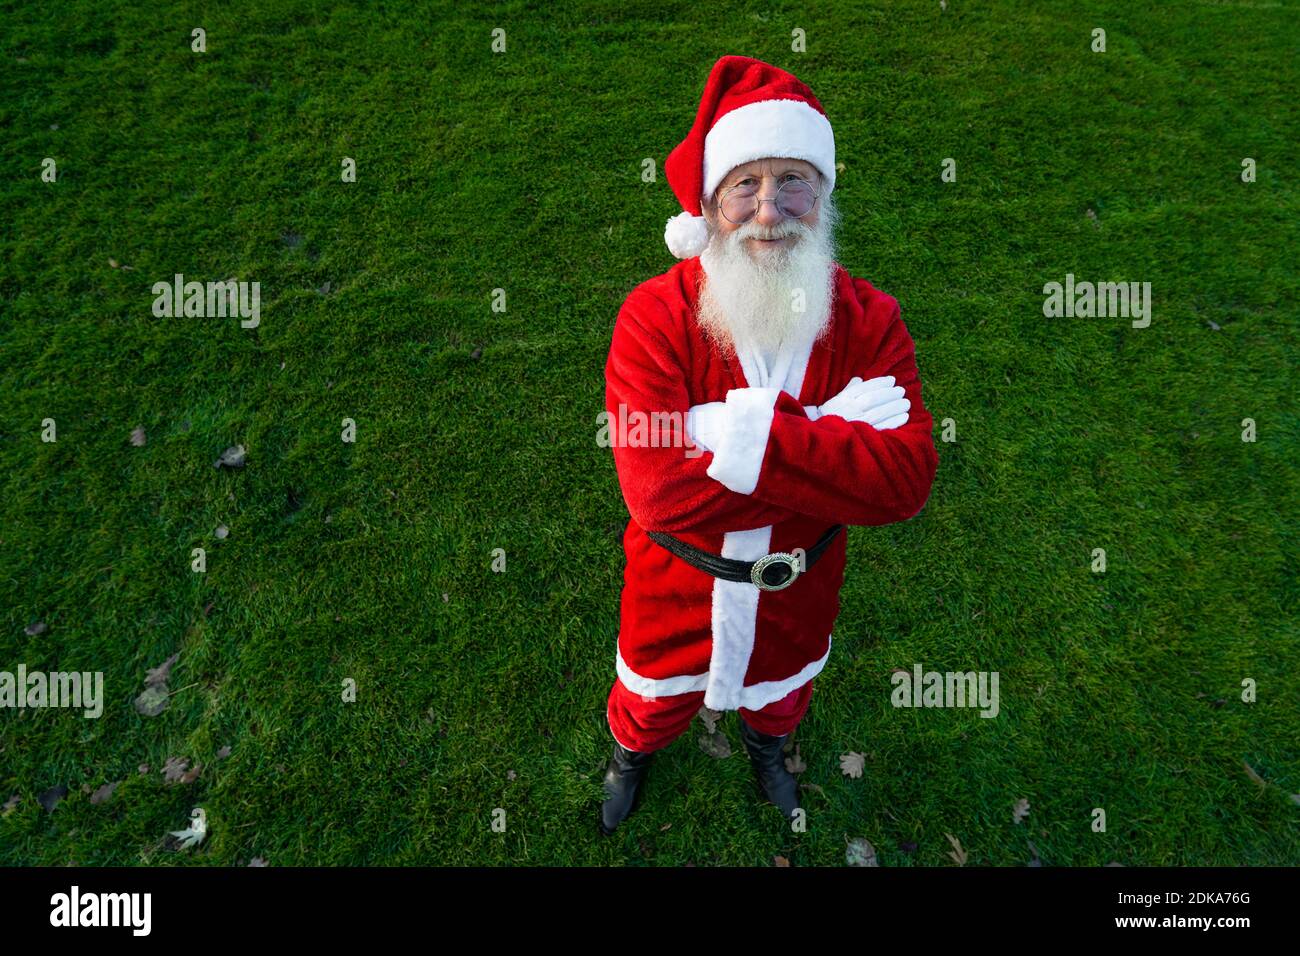 Funny Santa Claus wearing red costume in glasses while standing on the street Stock Photo